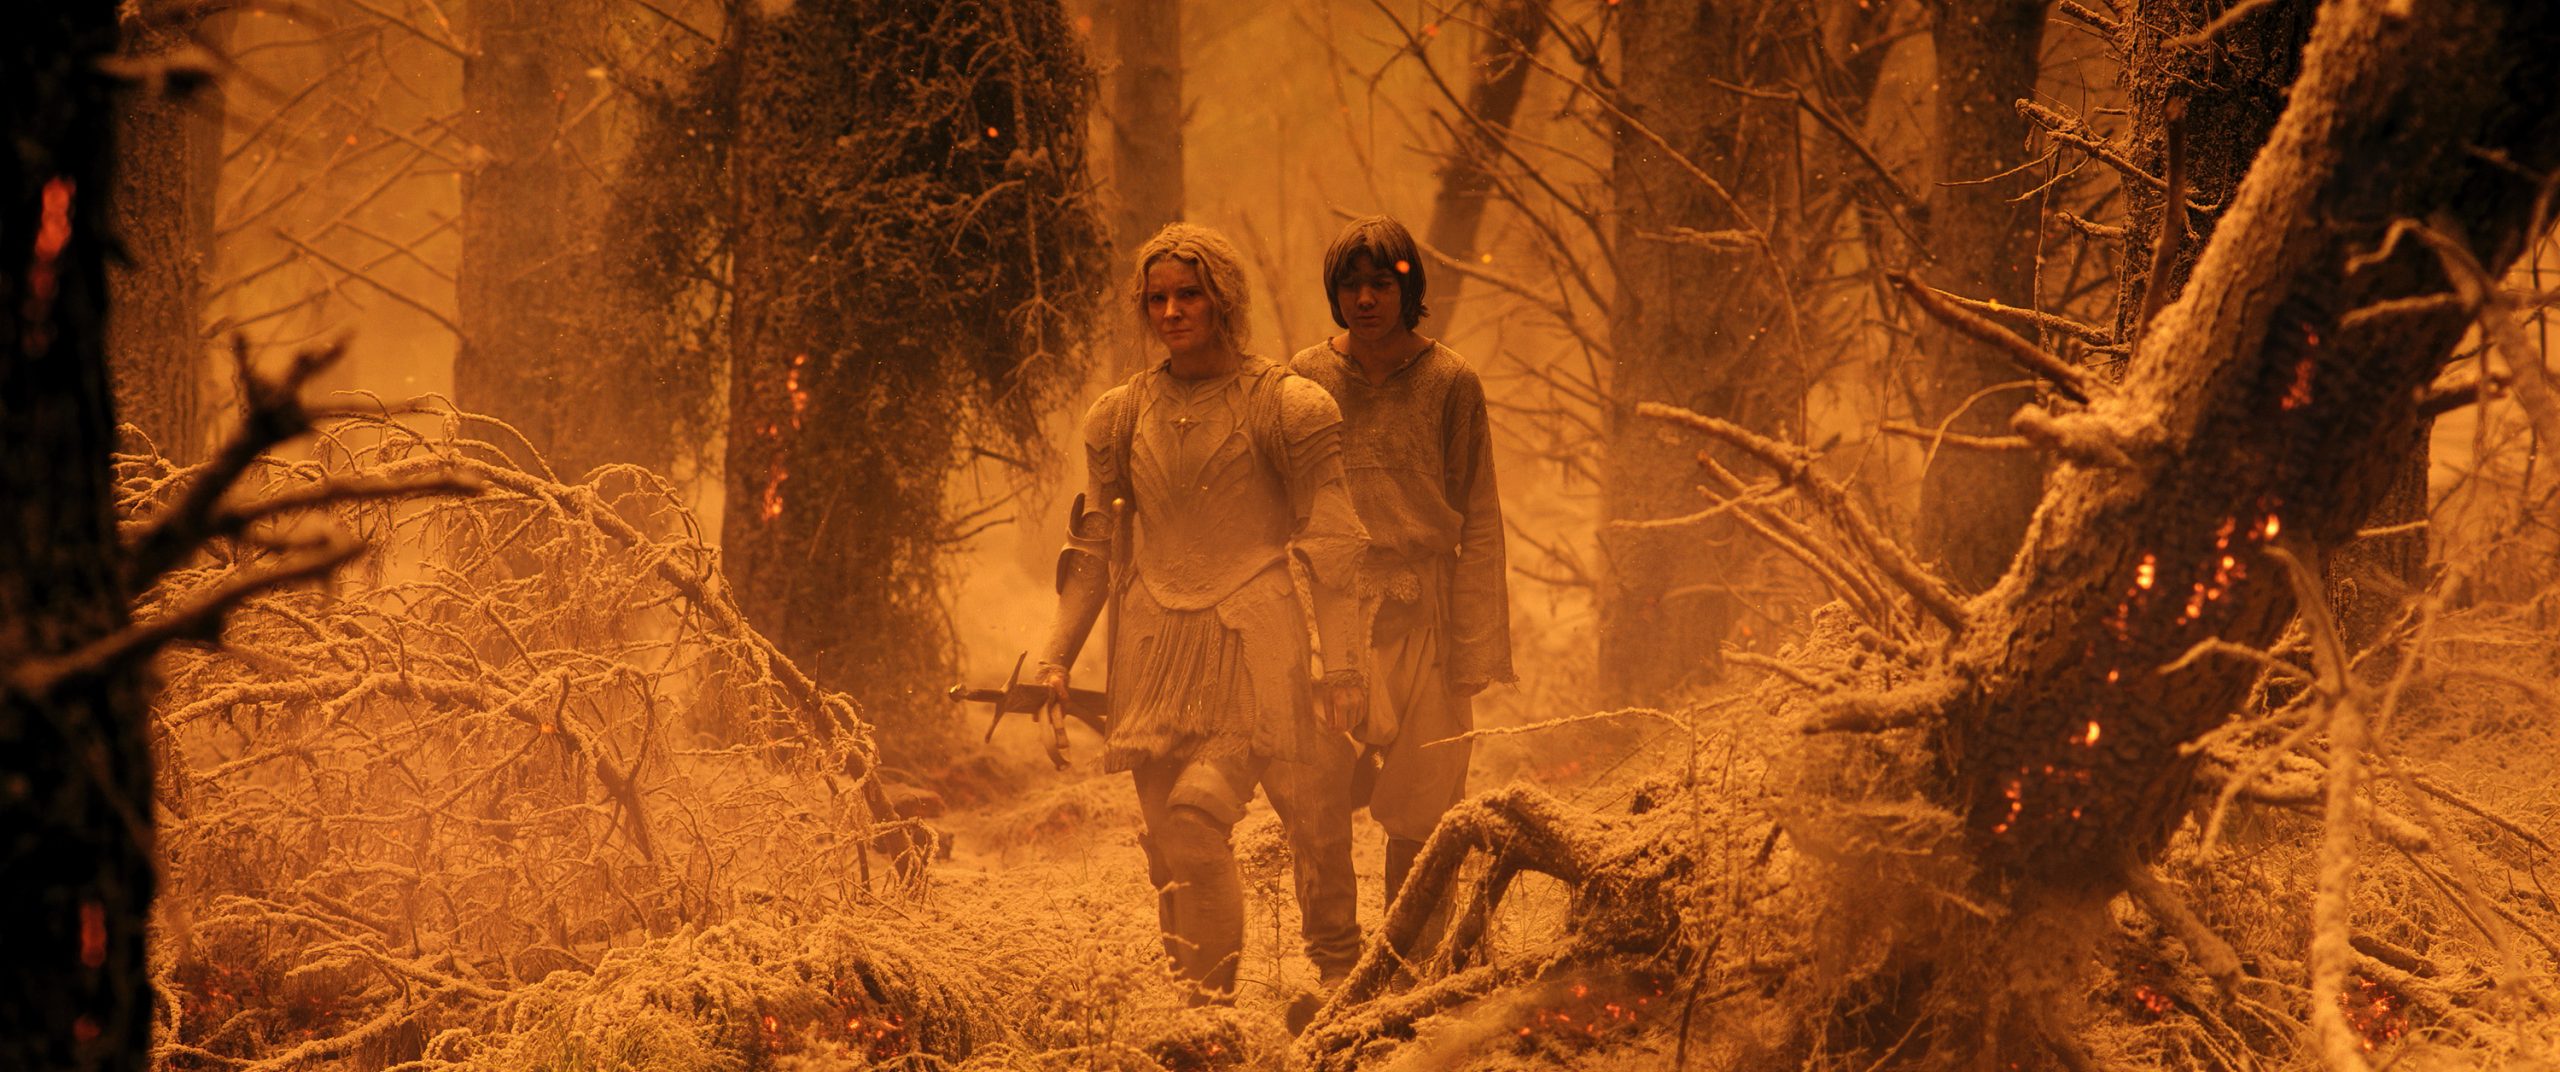 Galadriel (Morfydd Clark) and Theo (Tyroe Muhafidin) trudge forward after Mt. Doom devastates Middle-Earth in The Lord of the Rings: The Rings of Power Season 1 Episode 7 "The Eye" (2022), Amazon Studios